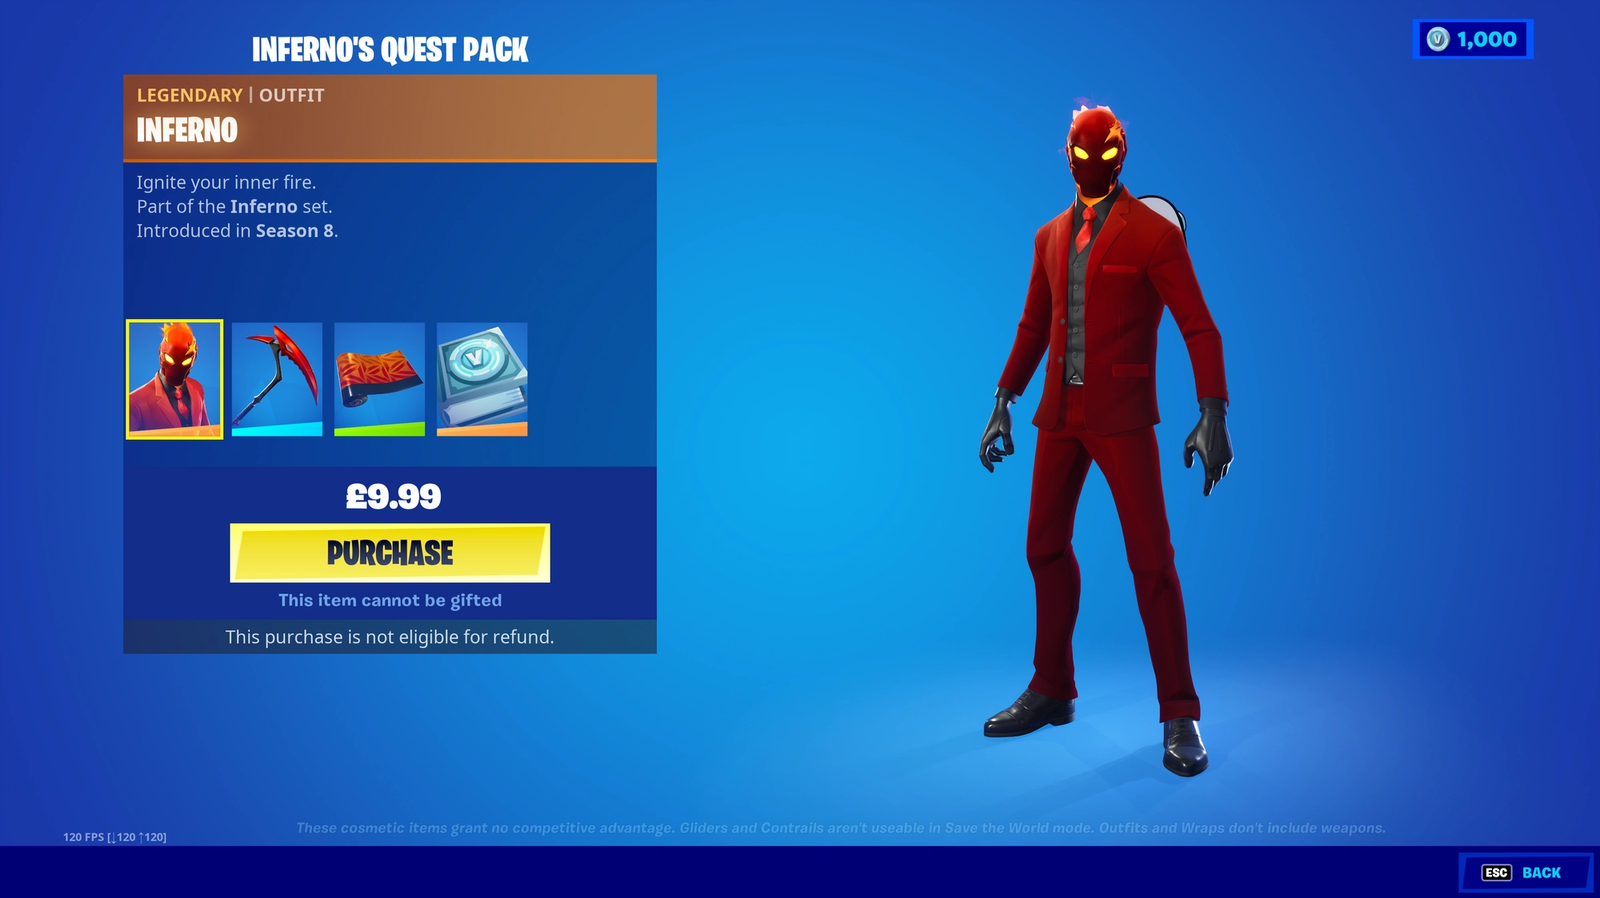 The feature outfit of Inferno's Quest Pack in Fortnite